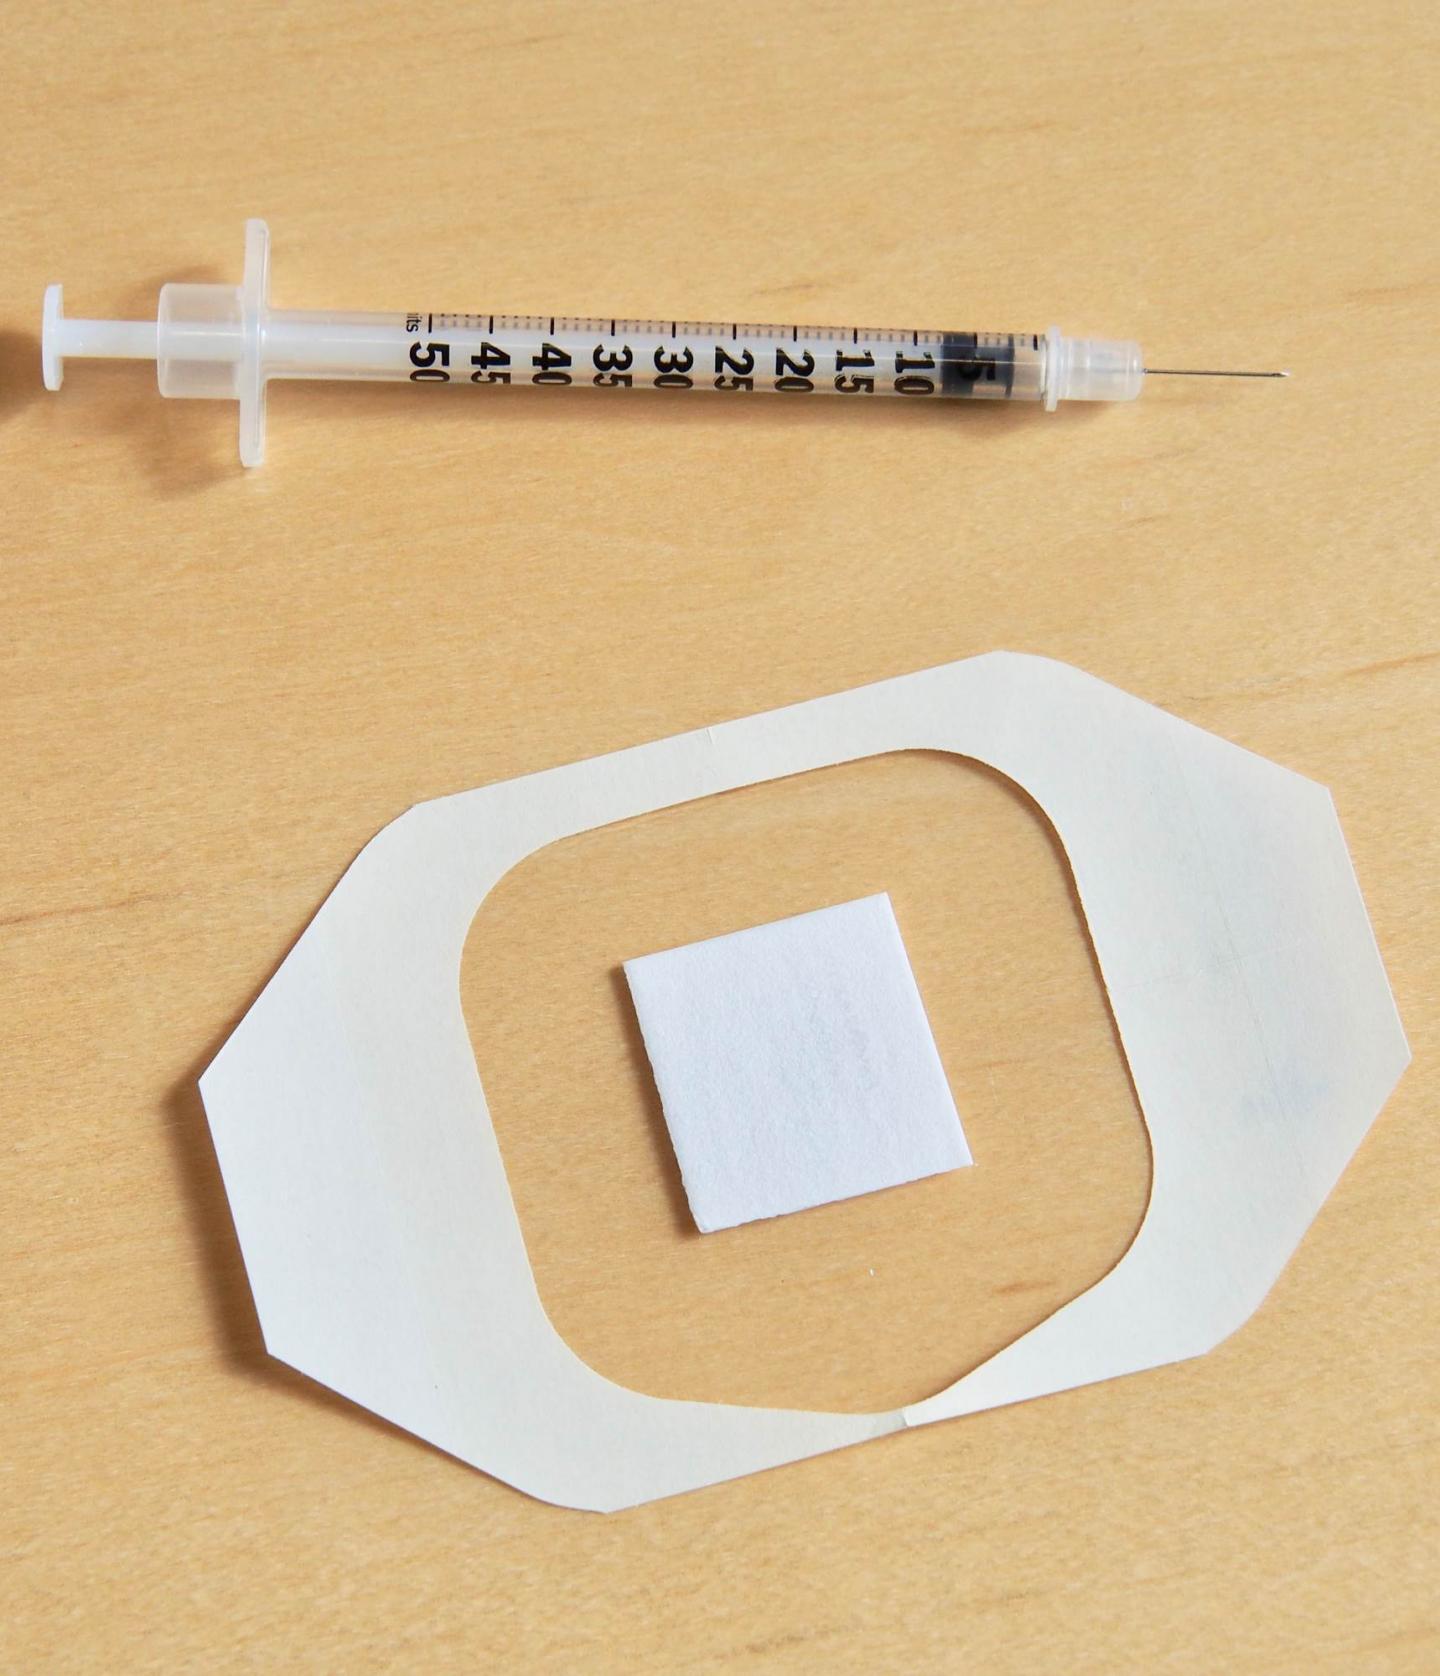 Needle-Free Flu Vaccine Patch Effective in Early Study